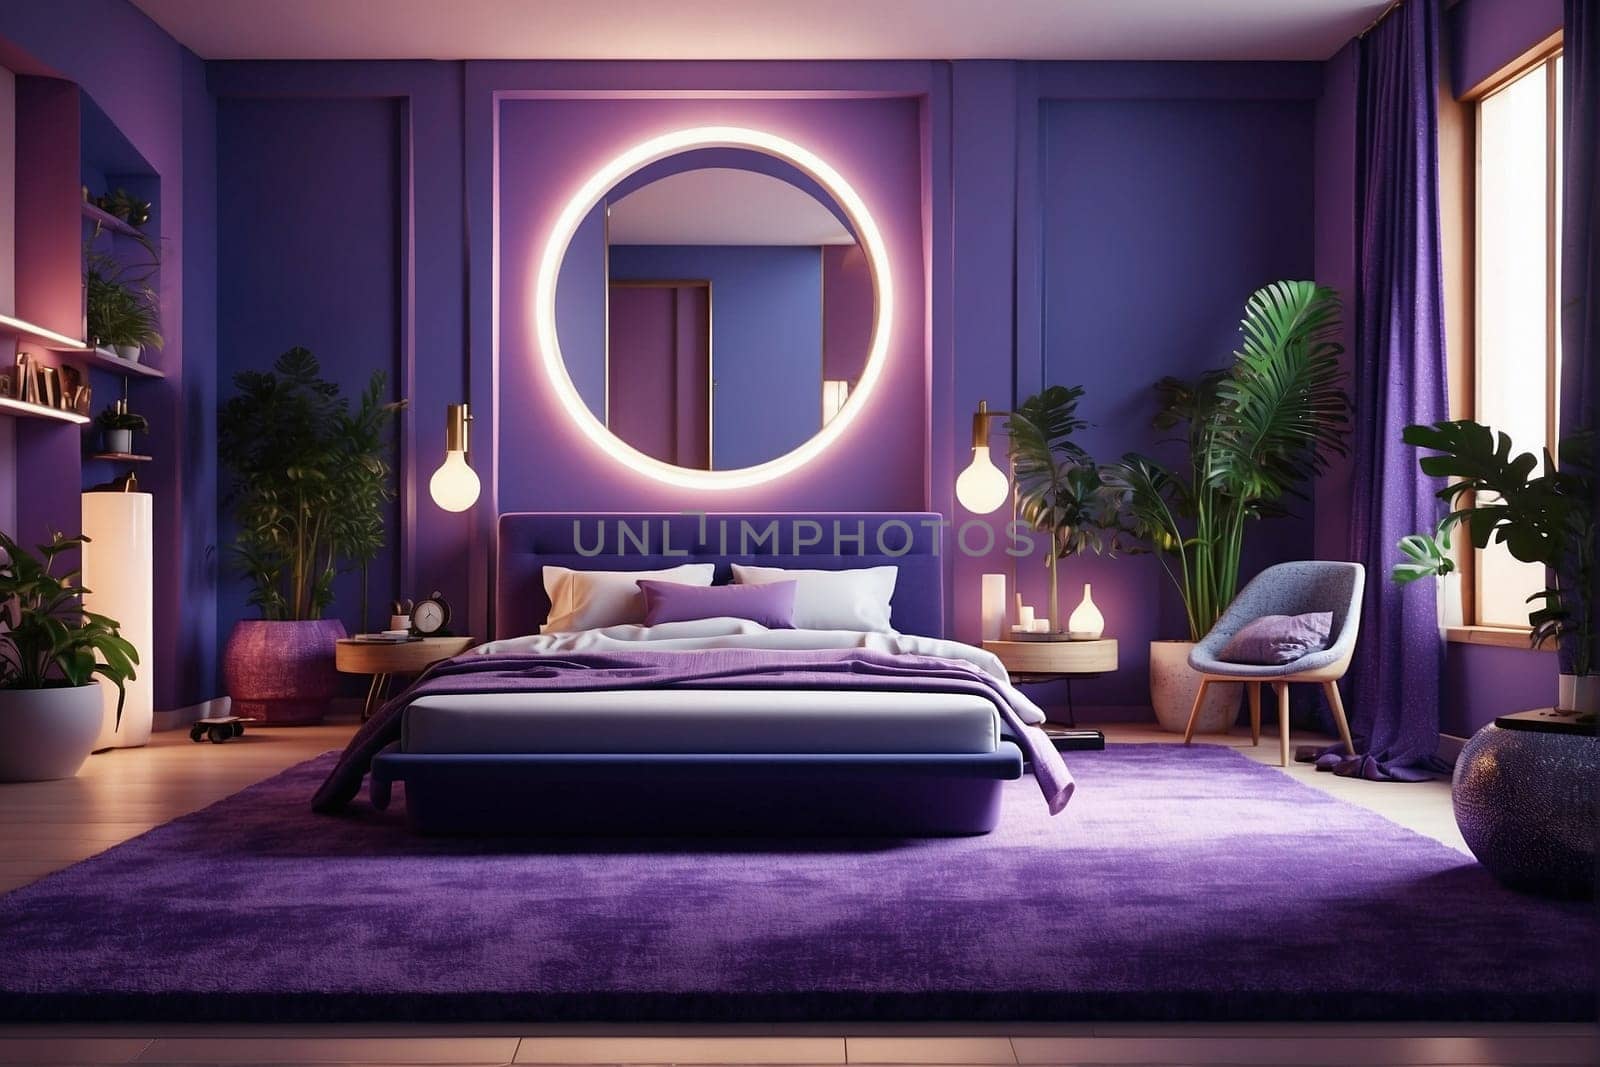 A bedroom featuring purple walls and a round mirror, creating a vibrant and modern atmosphere.